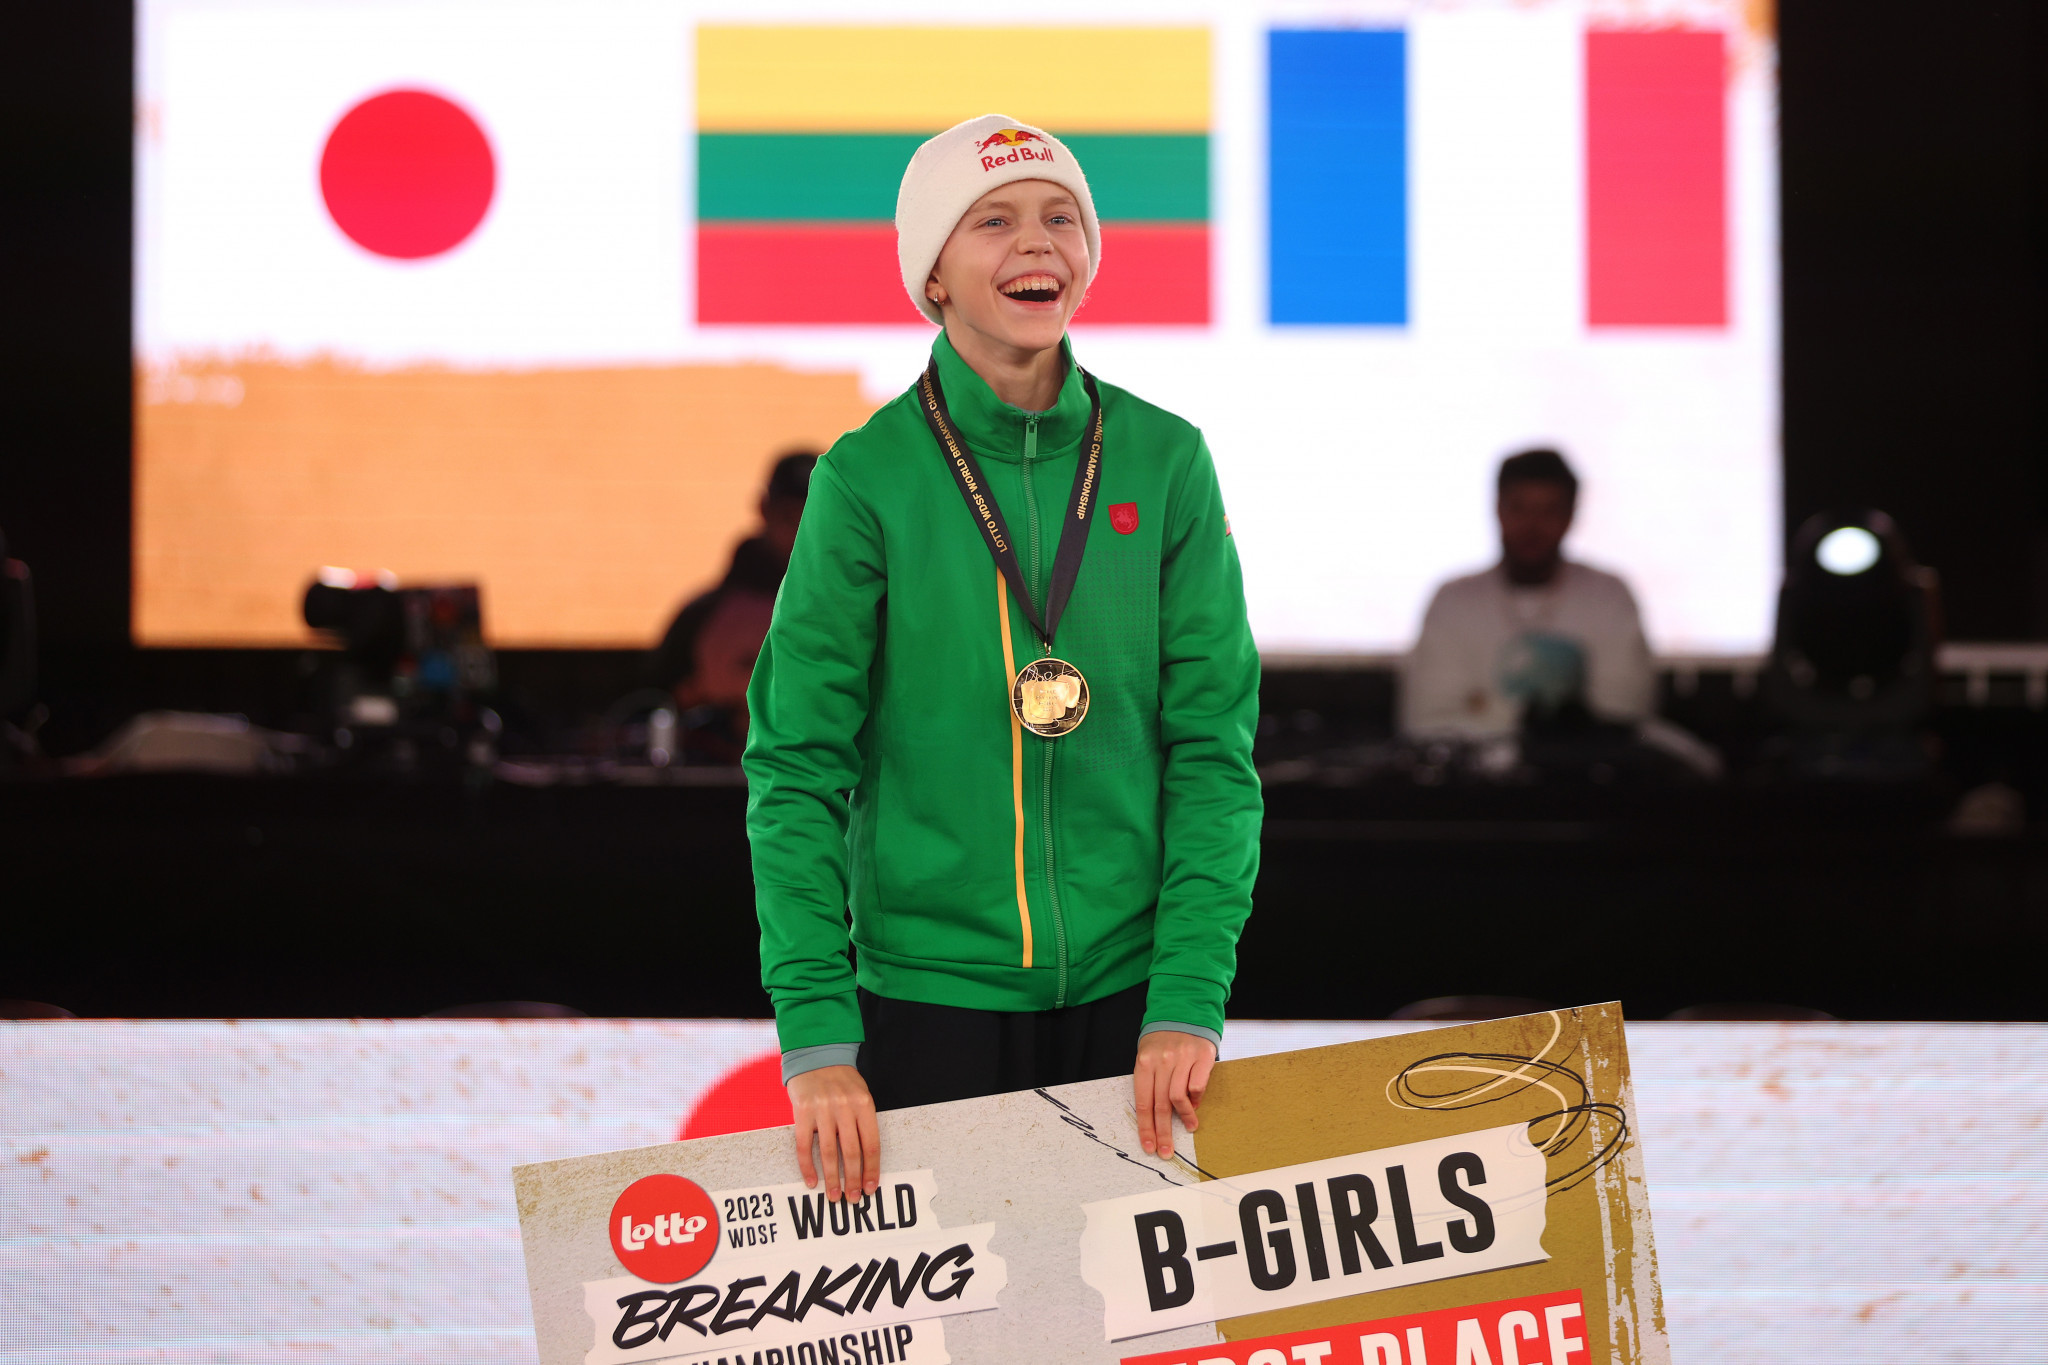 B-Boy Victor and B-Girl Nicka earn Paris 2024 quota places at WDSF World Breaking Championships